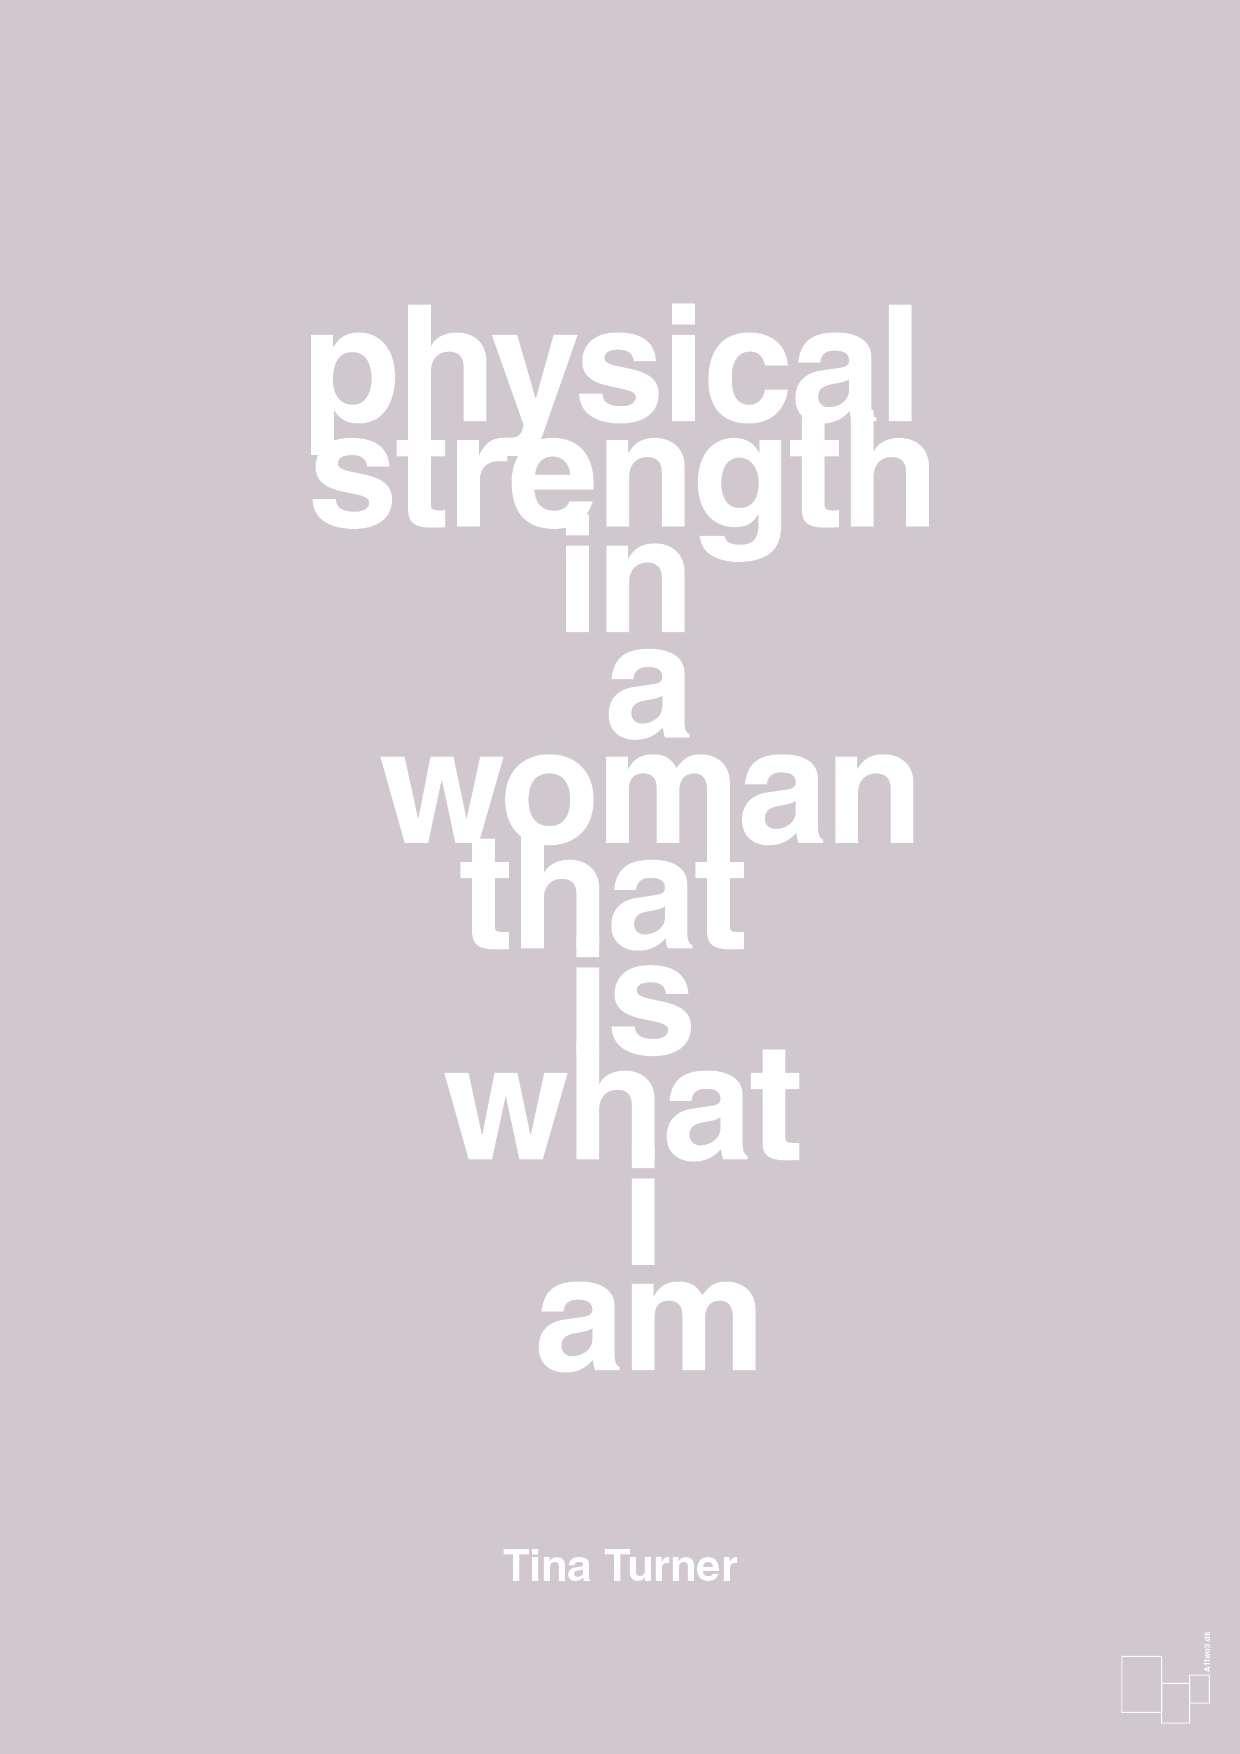 physical strength in a woman that’s what I am - Plakat med Citater i Dusty Lilac